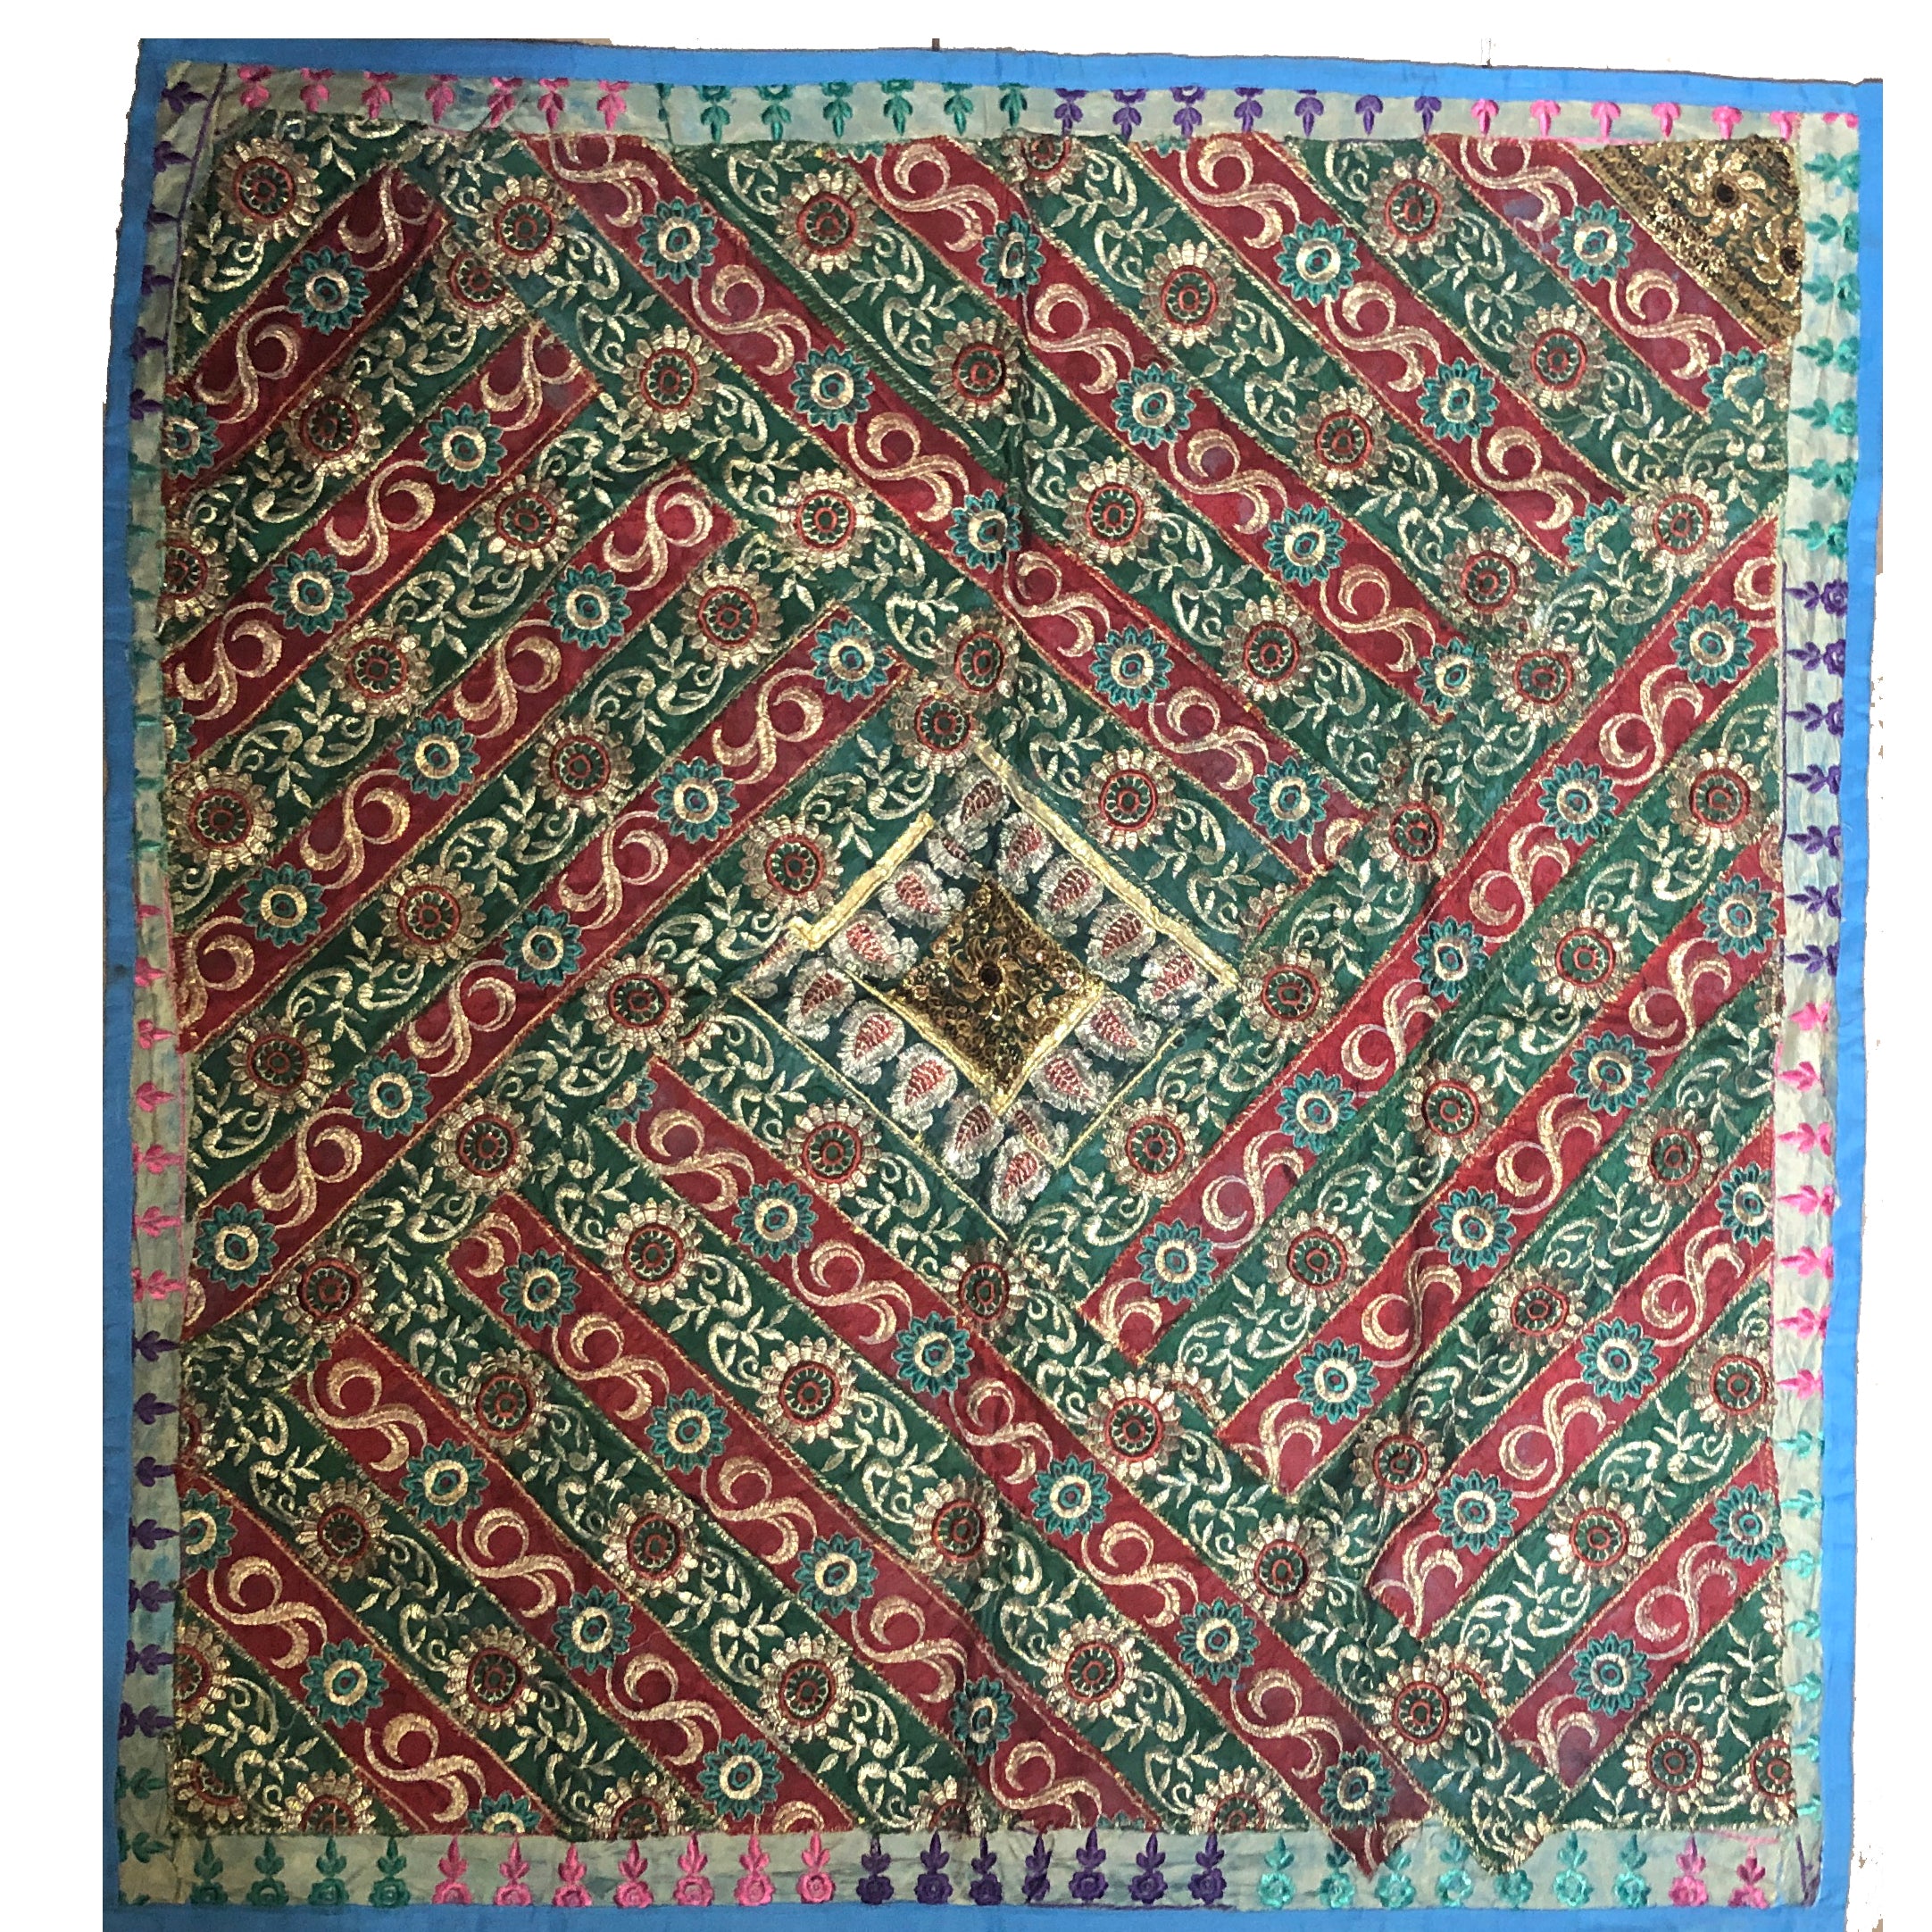 Wall hanging square 04 - Vintage India NYC